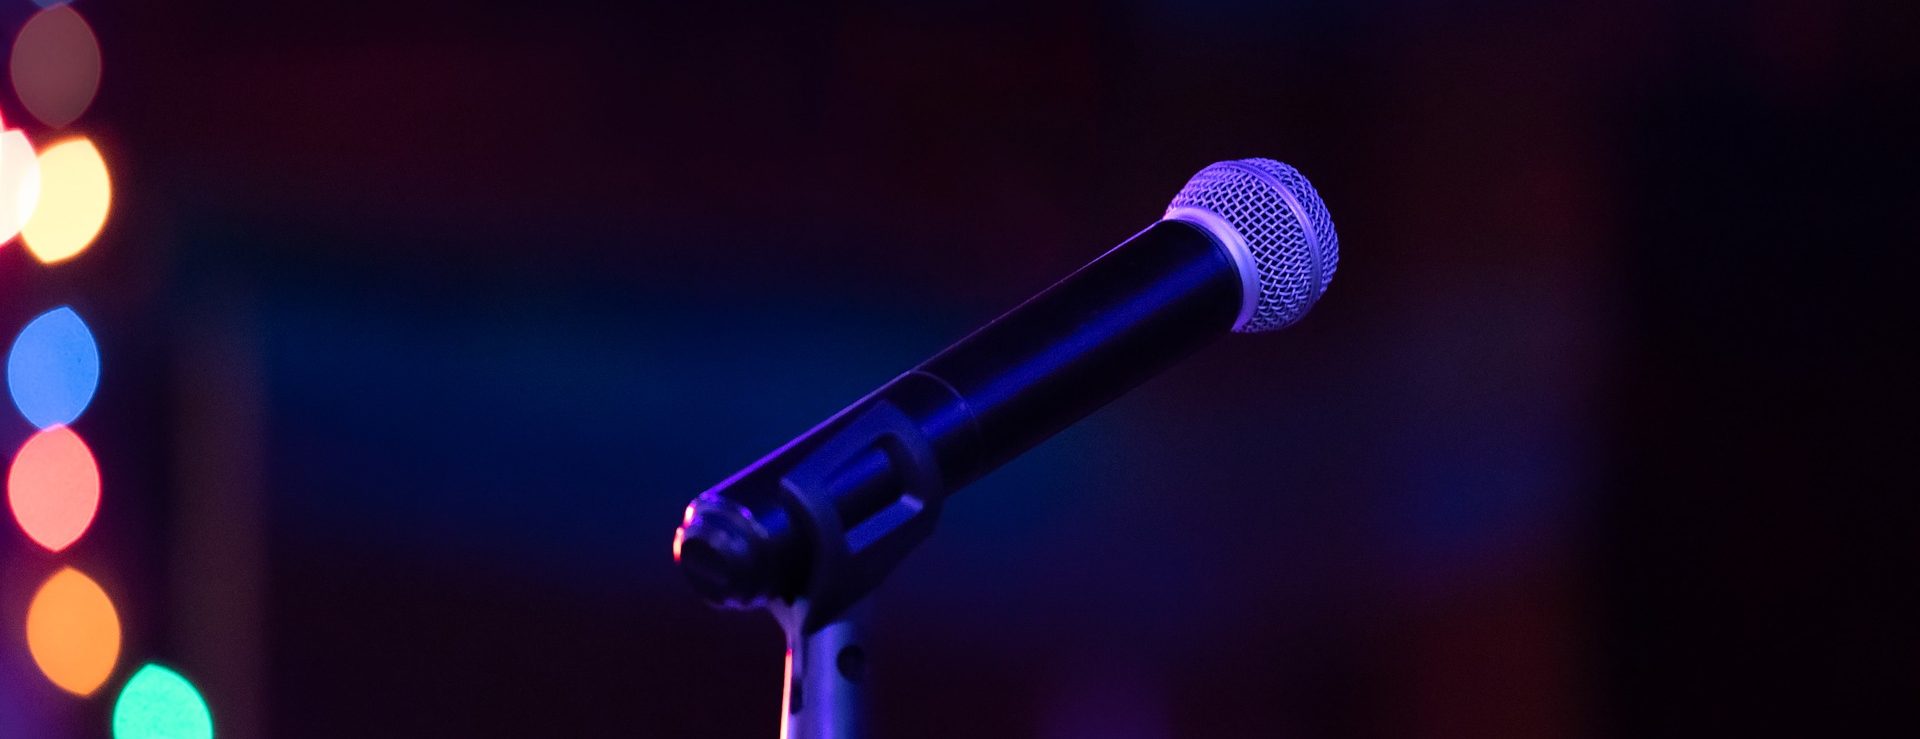 a dark background with multicolored lights blurred along the left side. A microphone on a stand is in the middle of the picture.